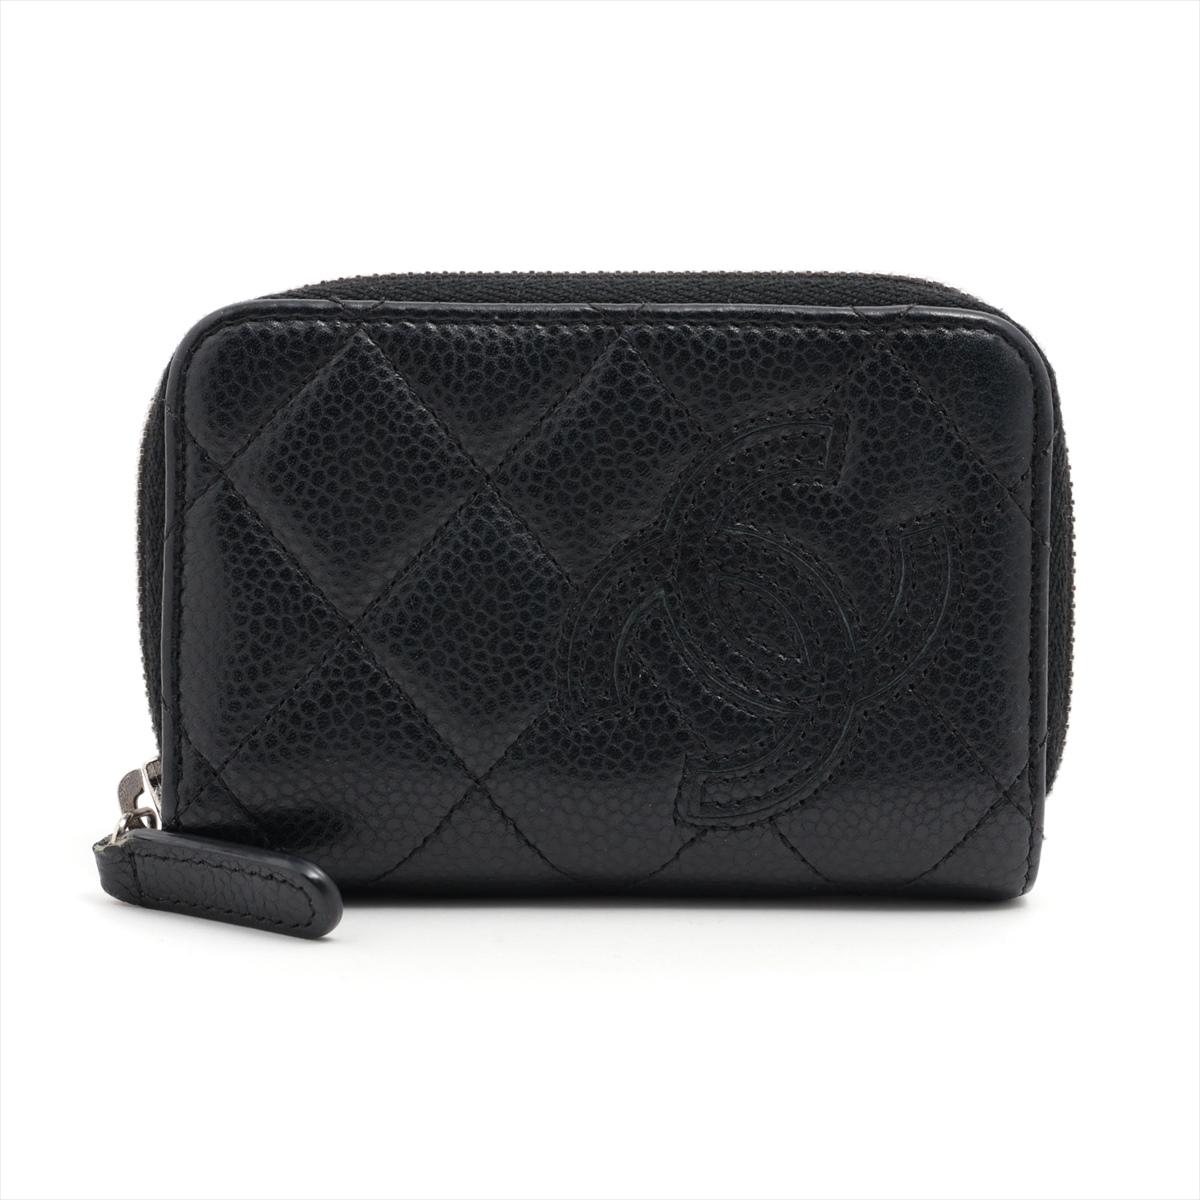 The Chanel CC Logo Matelasse Caviar Skin Coin Case Zippy Wallet in Black is a luxurious and versatile accessory that epitomizes the sophistication of the Chanel brand. Crafted from high-quality caviar skin leather, the wallet features Chanel's